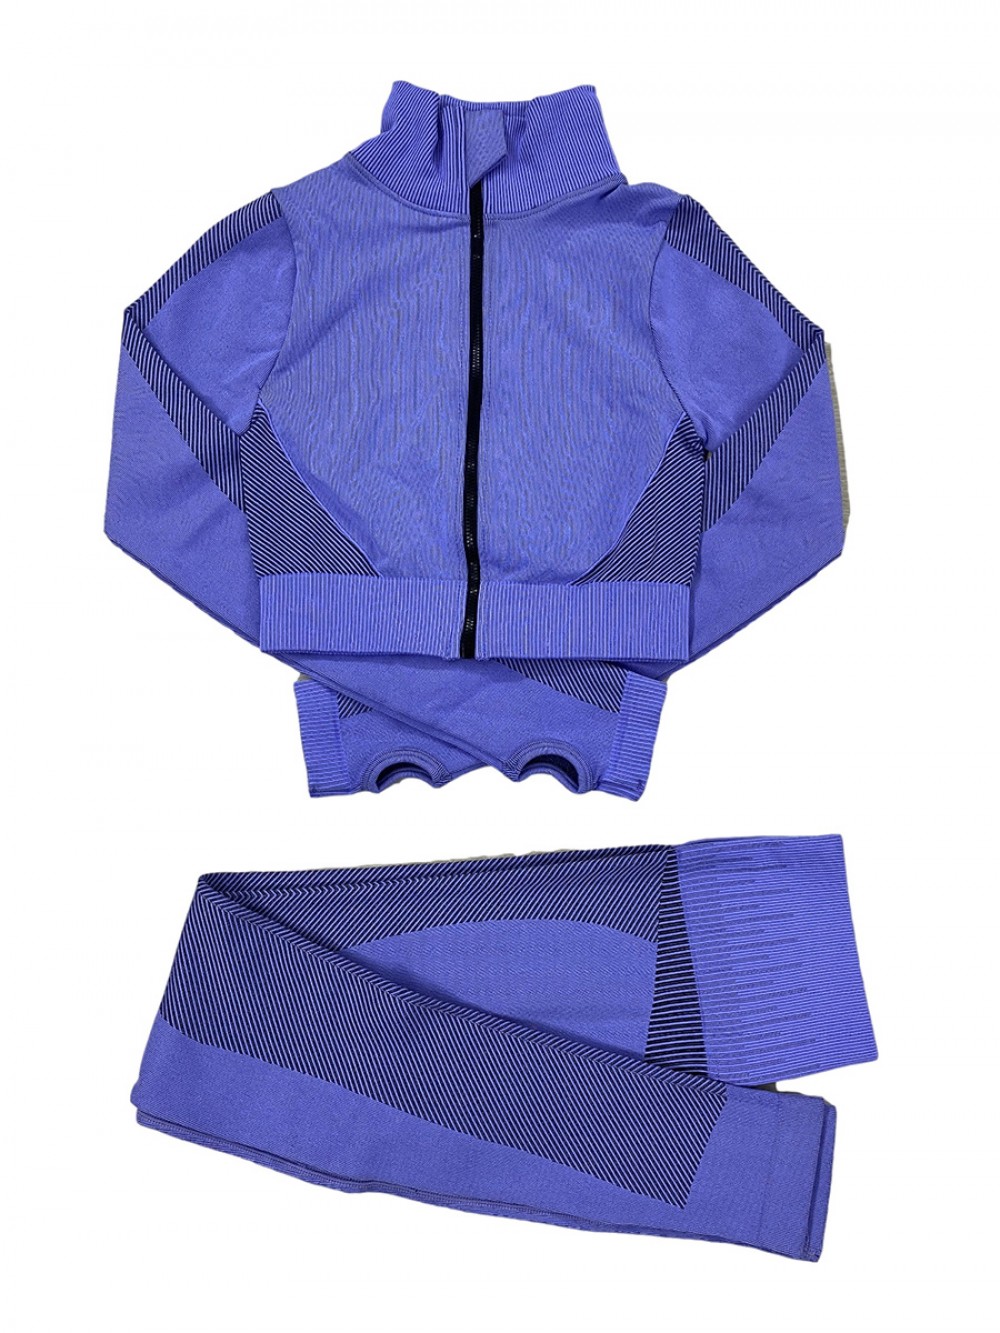 Blue Yoga Suit Zipper Thumbhole Full Length All Over Smooth